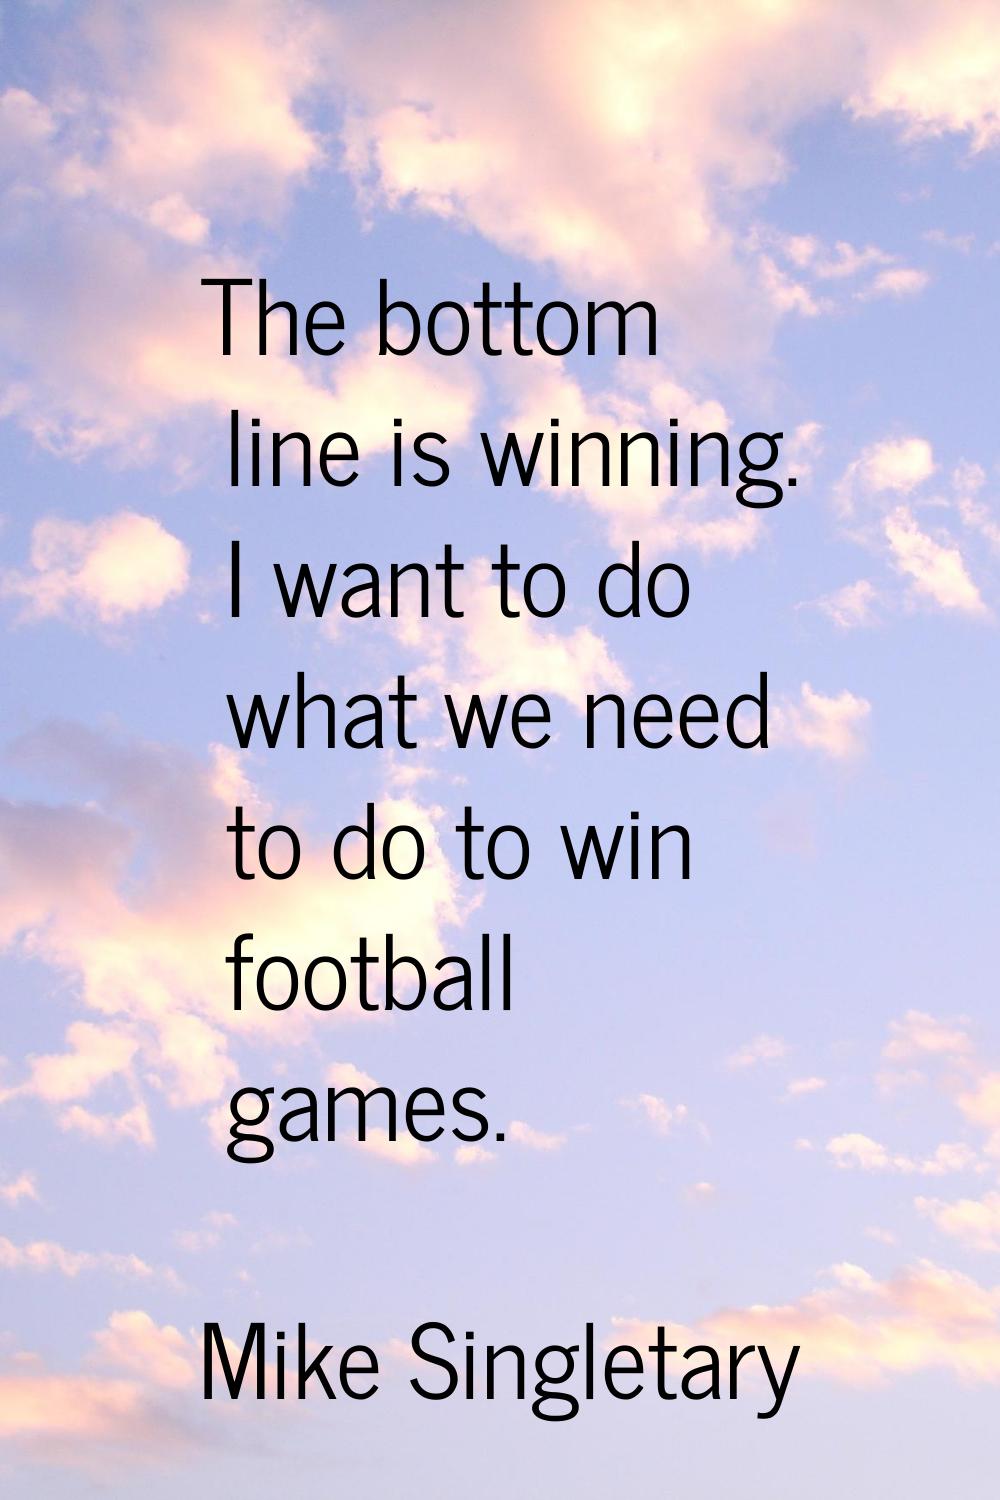 The bottom line is winning. I want to do what we need to do to win football games.